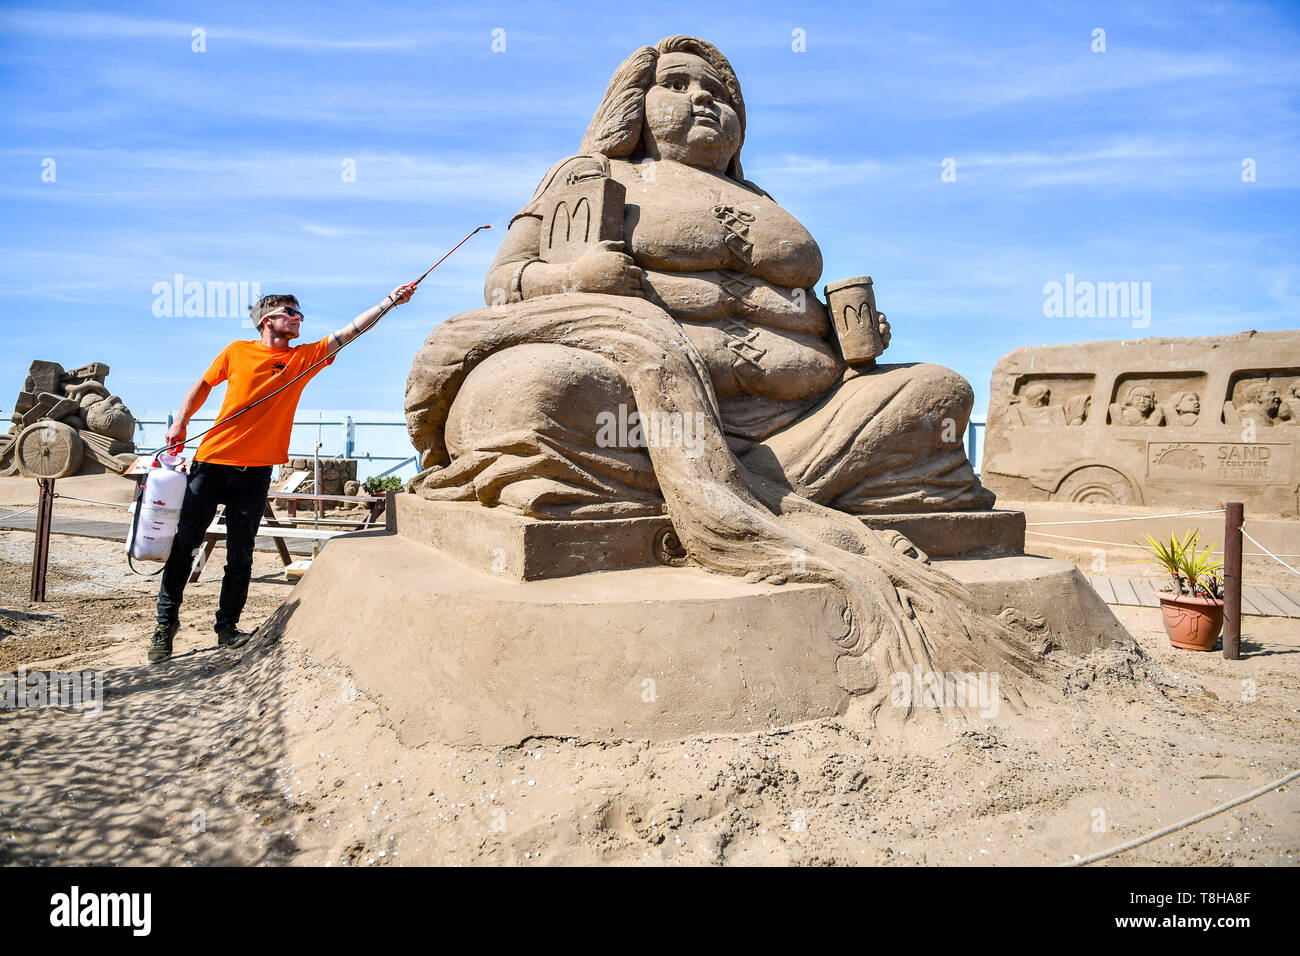 A worker sprays water to stop the sand drying out on a sculpture of an obese mermaid holding McDonald's fast food items, at the Weston Sand Sculpture Festival, Weston-super-Mare. Stock Photo